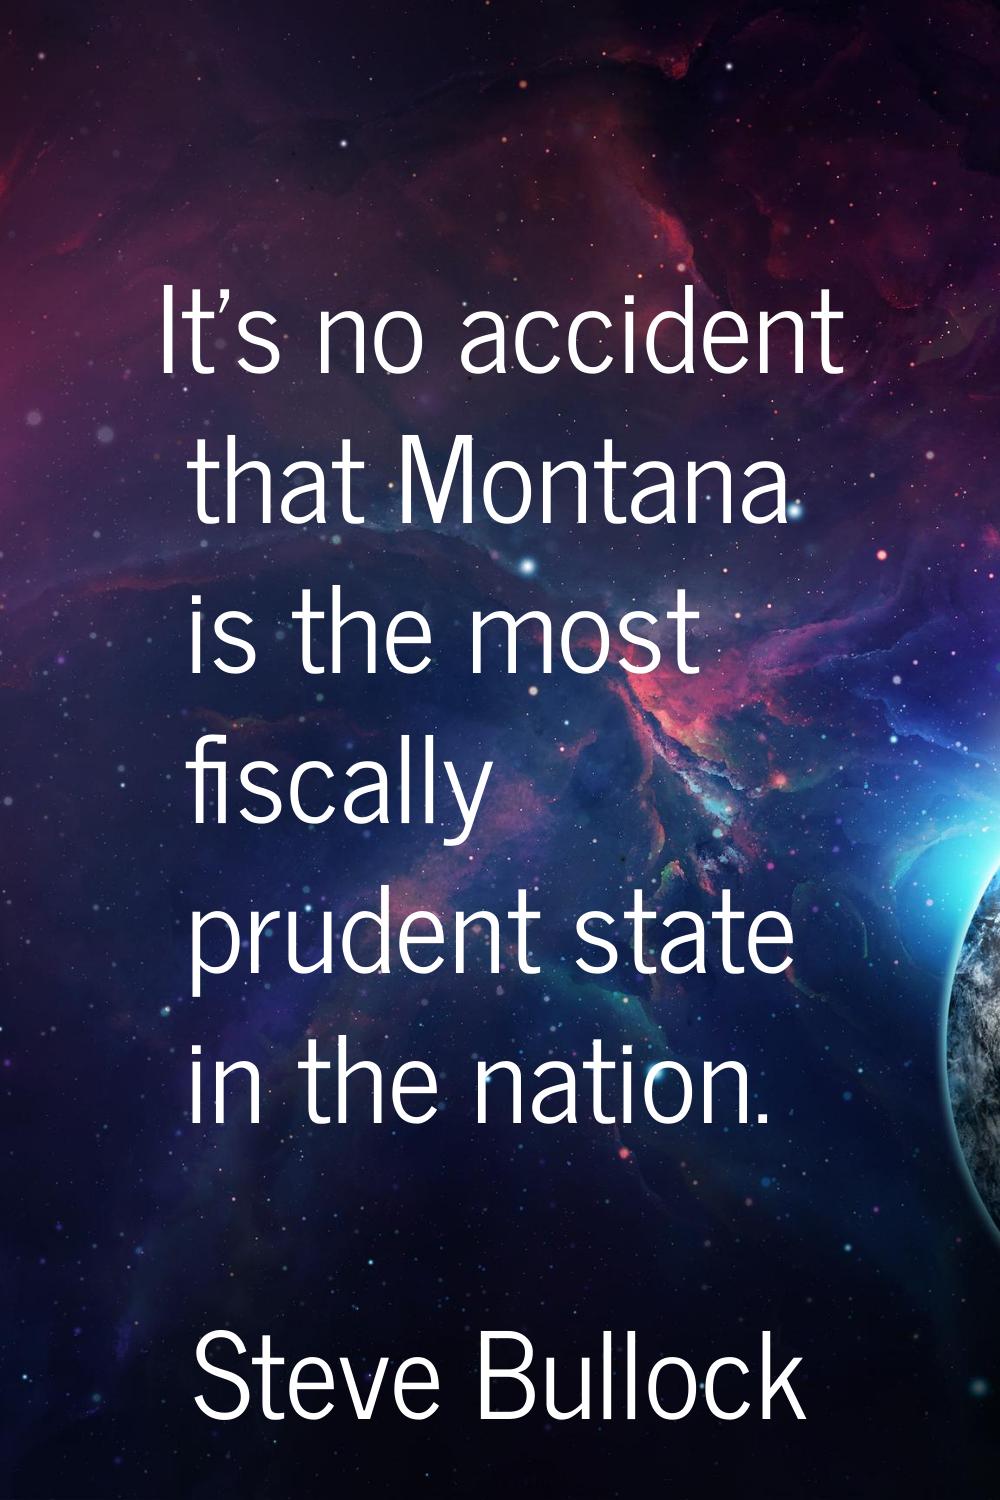 It's no accident that Montana is the most fiscally prudent state in the nation.